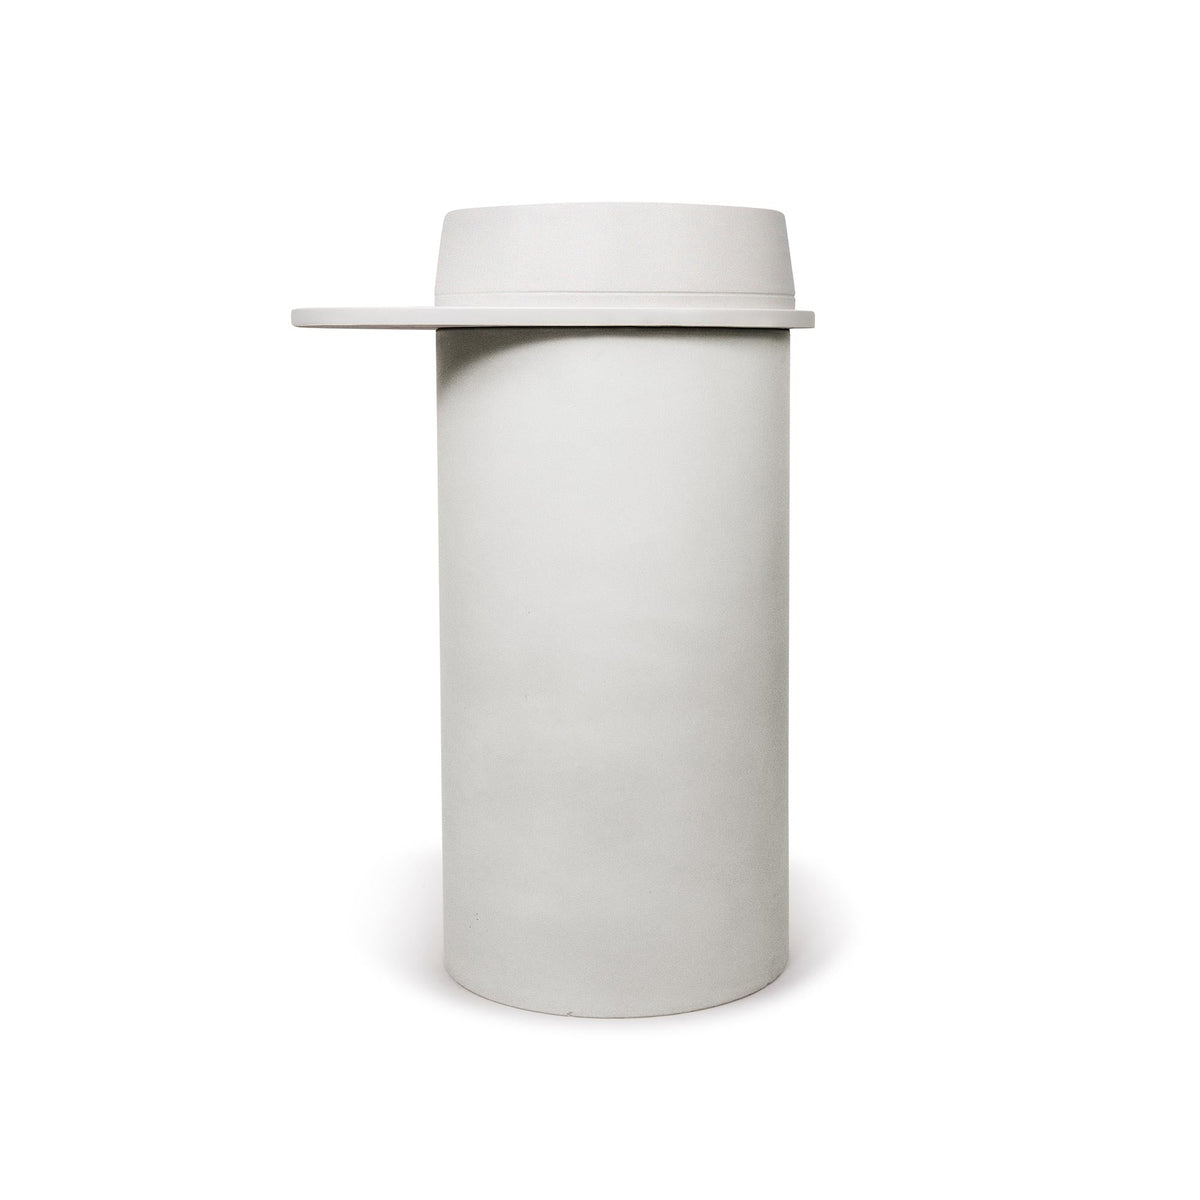 Cylinder with Tray - Funl Basin (Clay,Copan Blue)